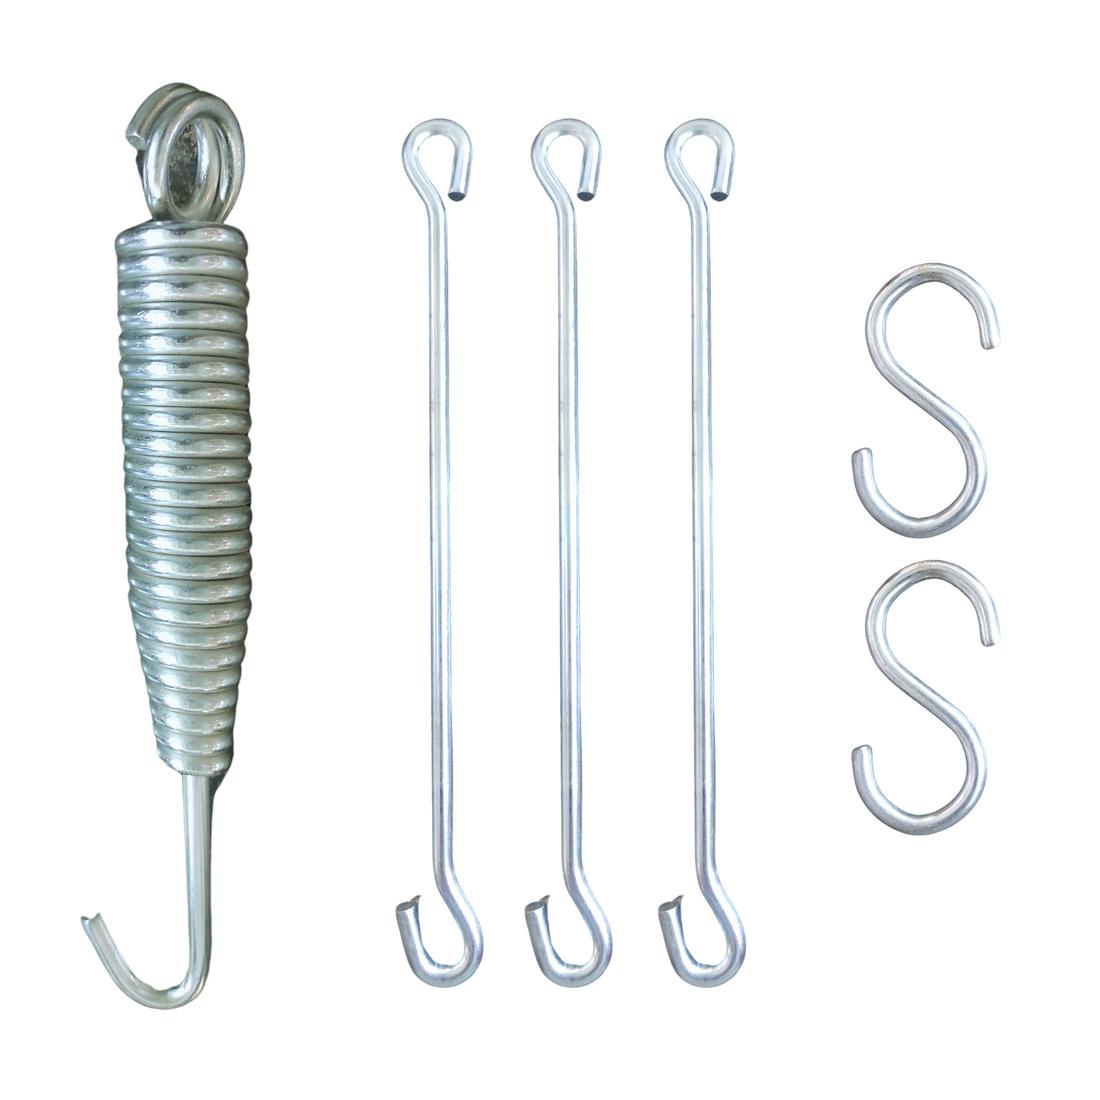 Hanging Accessories Set for Porch Swings - 1 Spring 3 Rod 2 S Hook